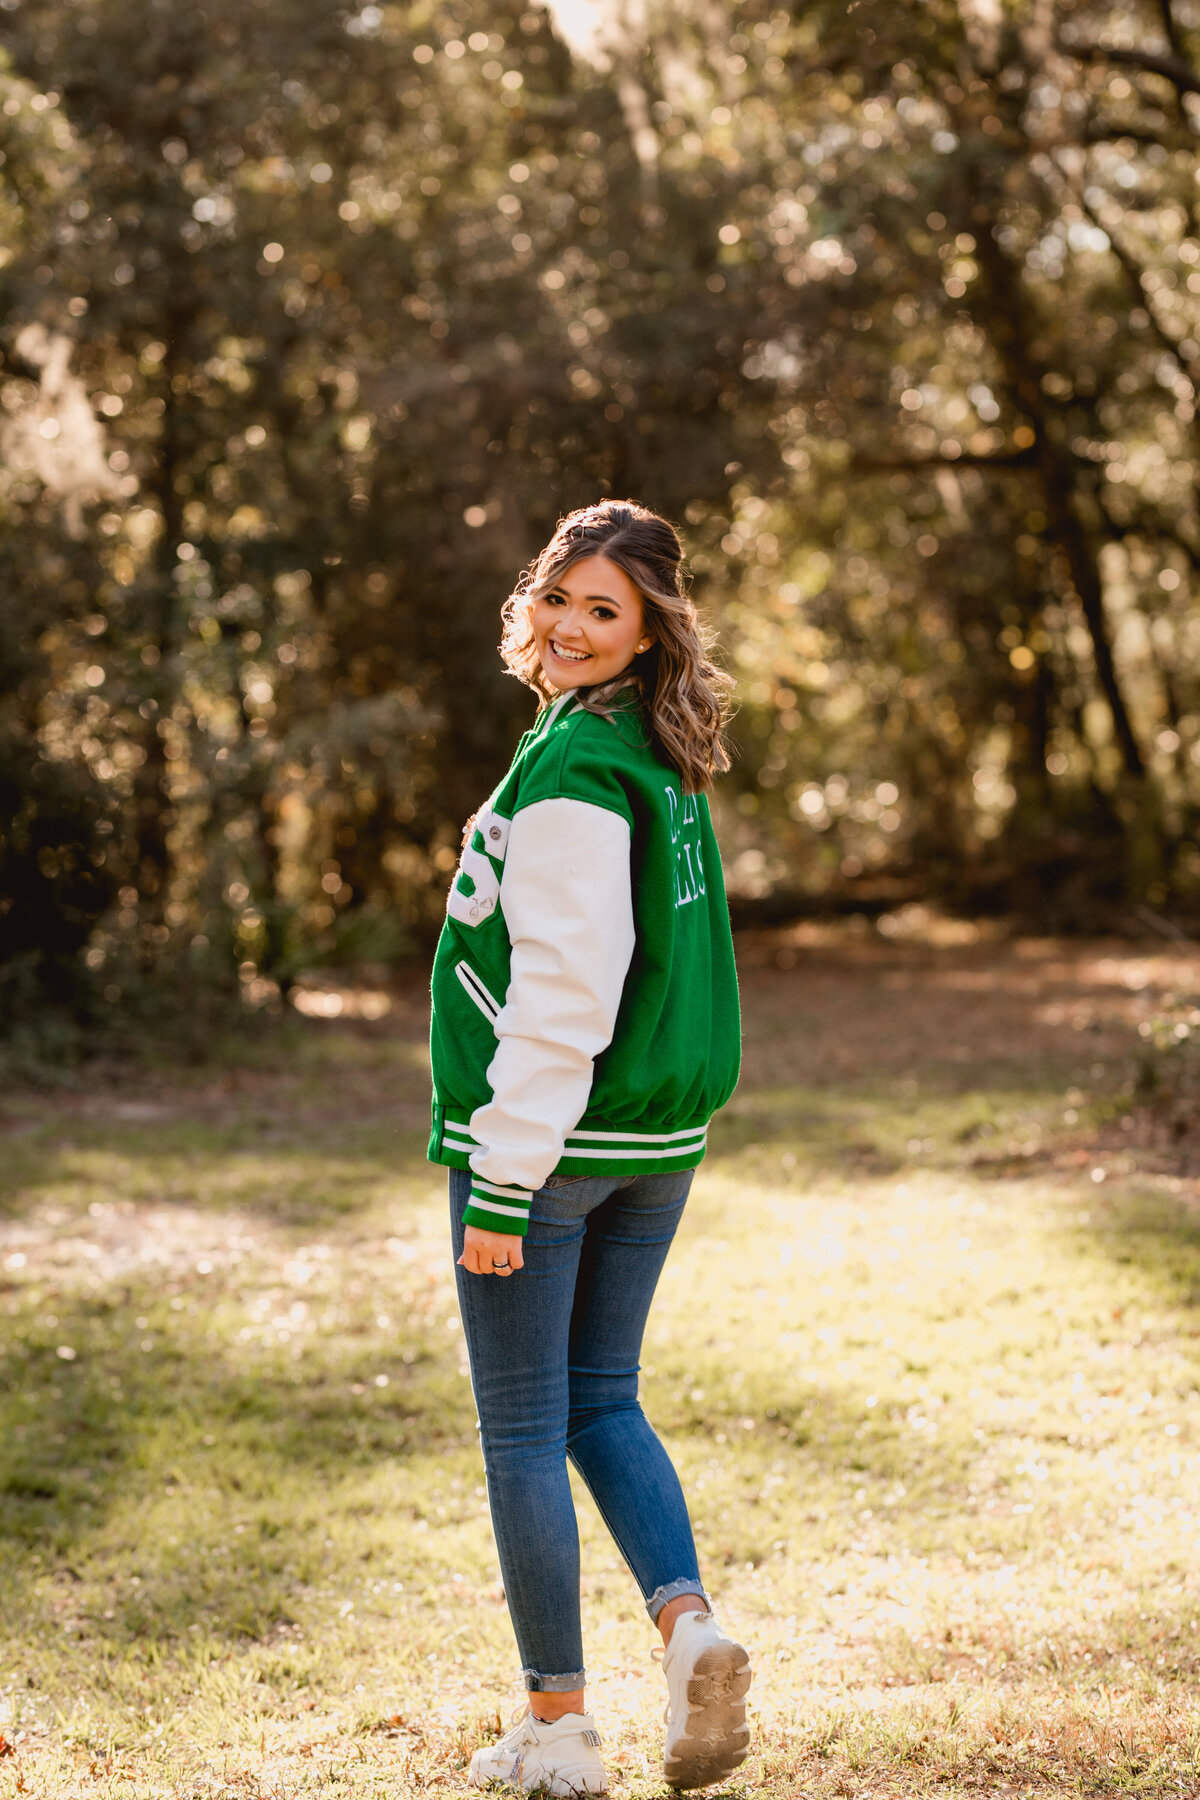 Senior pictures with letterman jacket in South Georgia